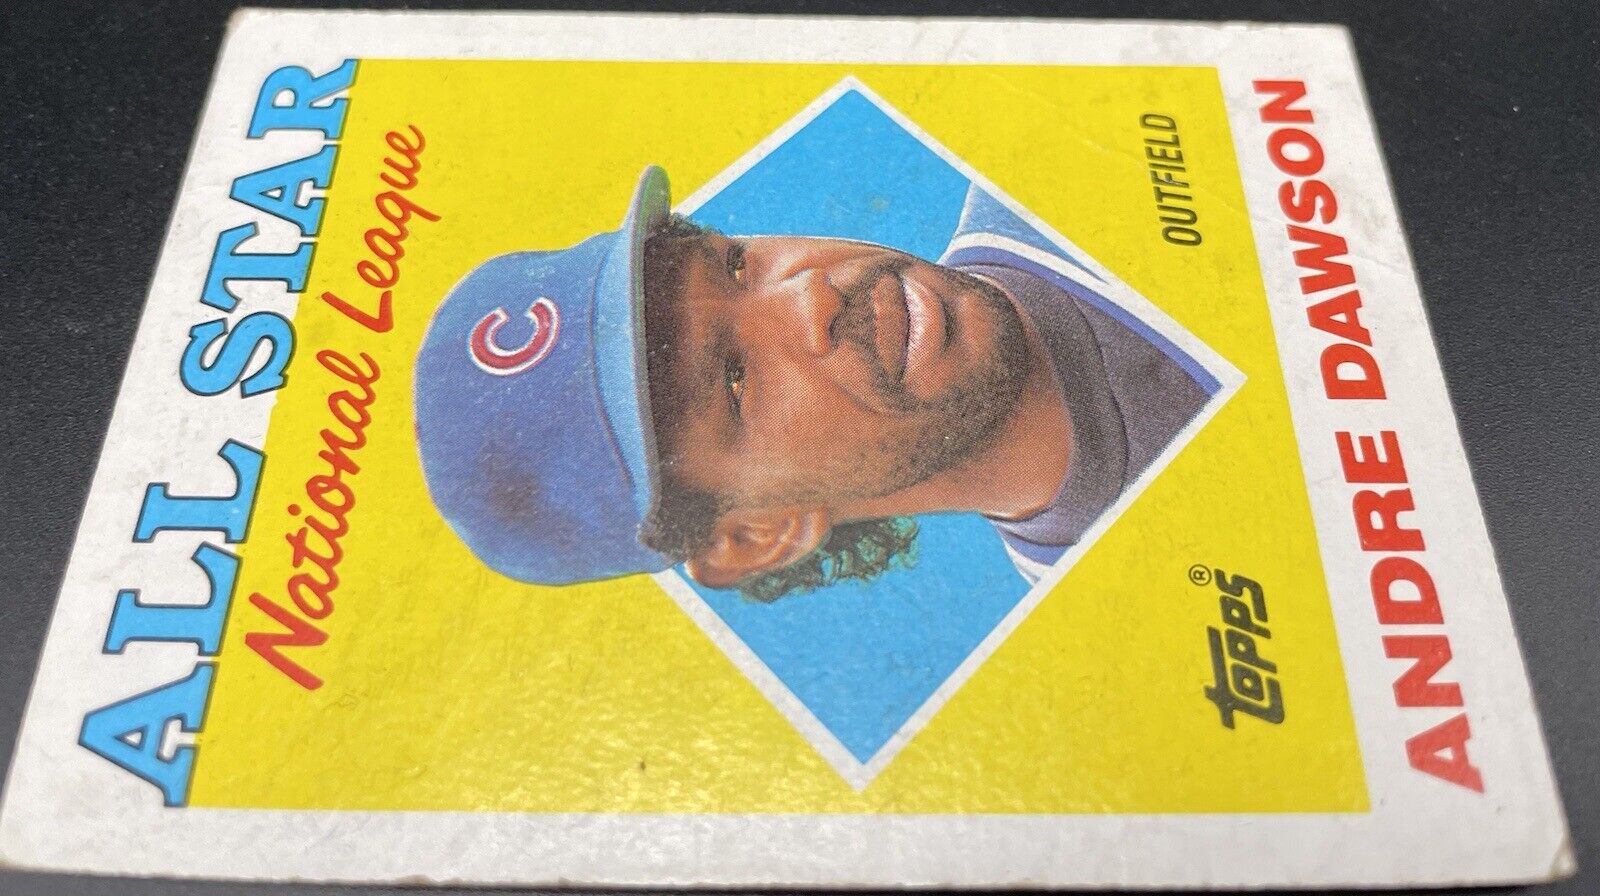 1988 Topps - All Star #401 Andre Dawson